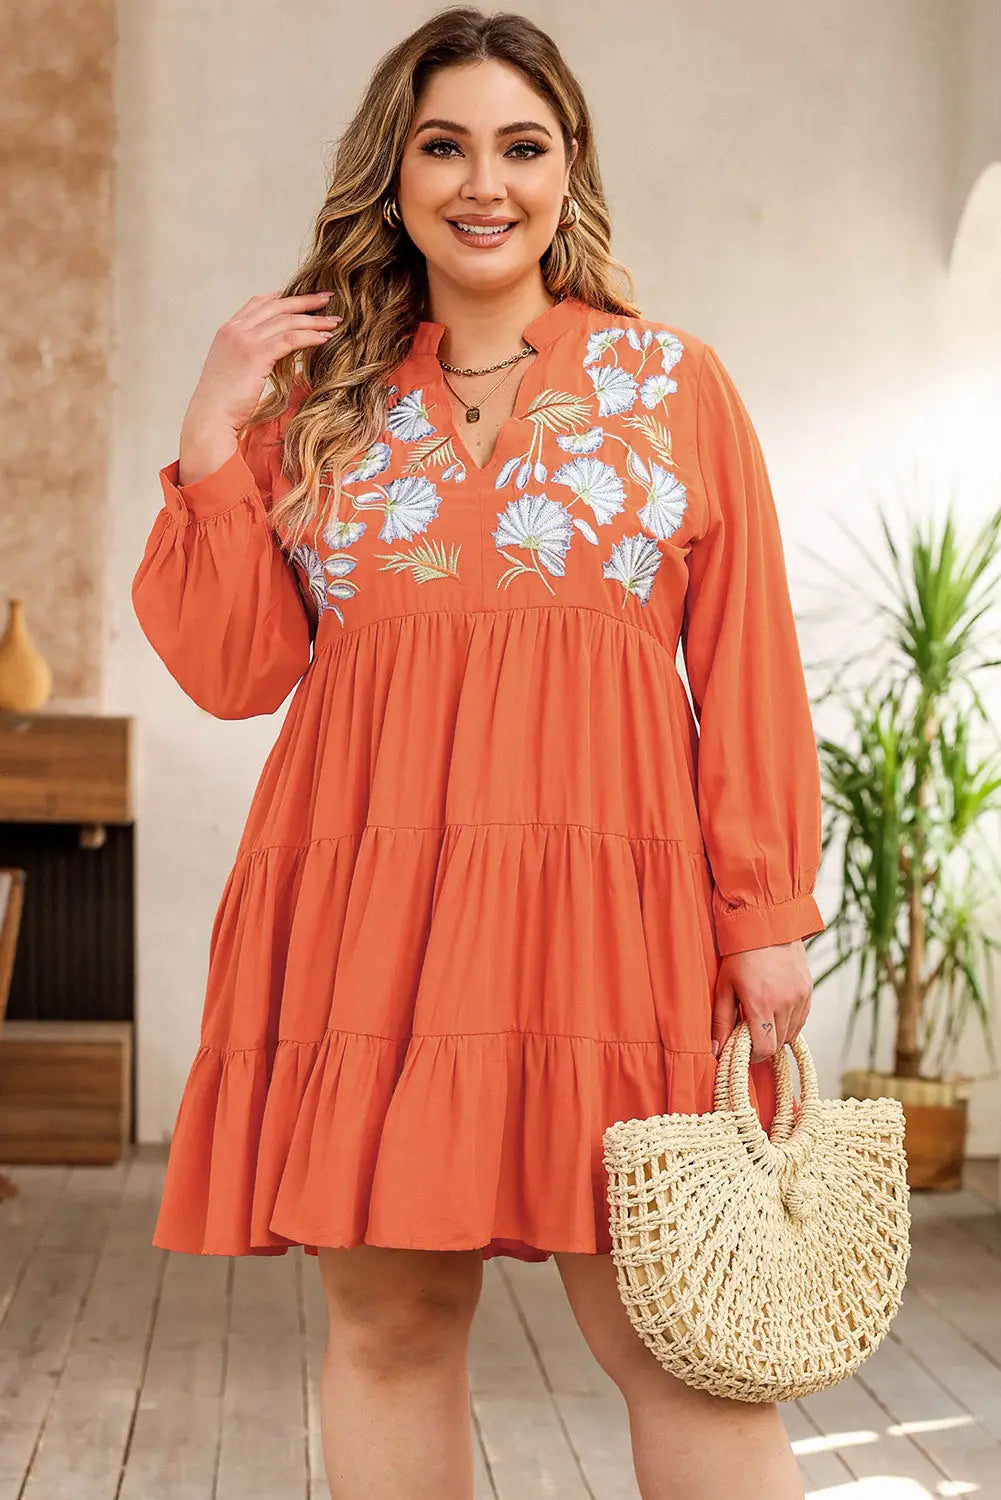 Orange plus size embroidered tiered ruffle dress - 1x / 75% viscose + 25% polyester